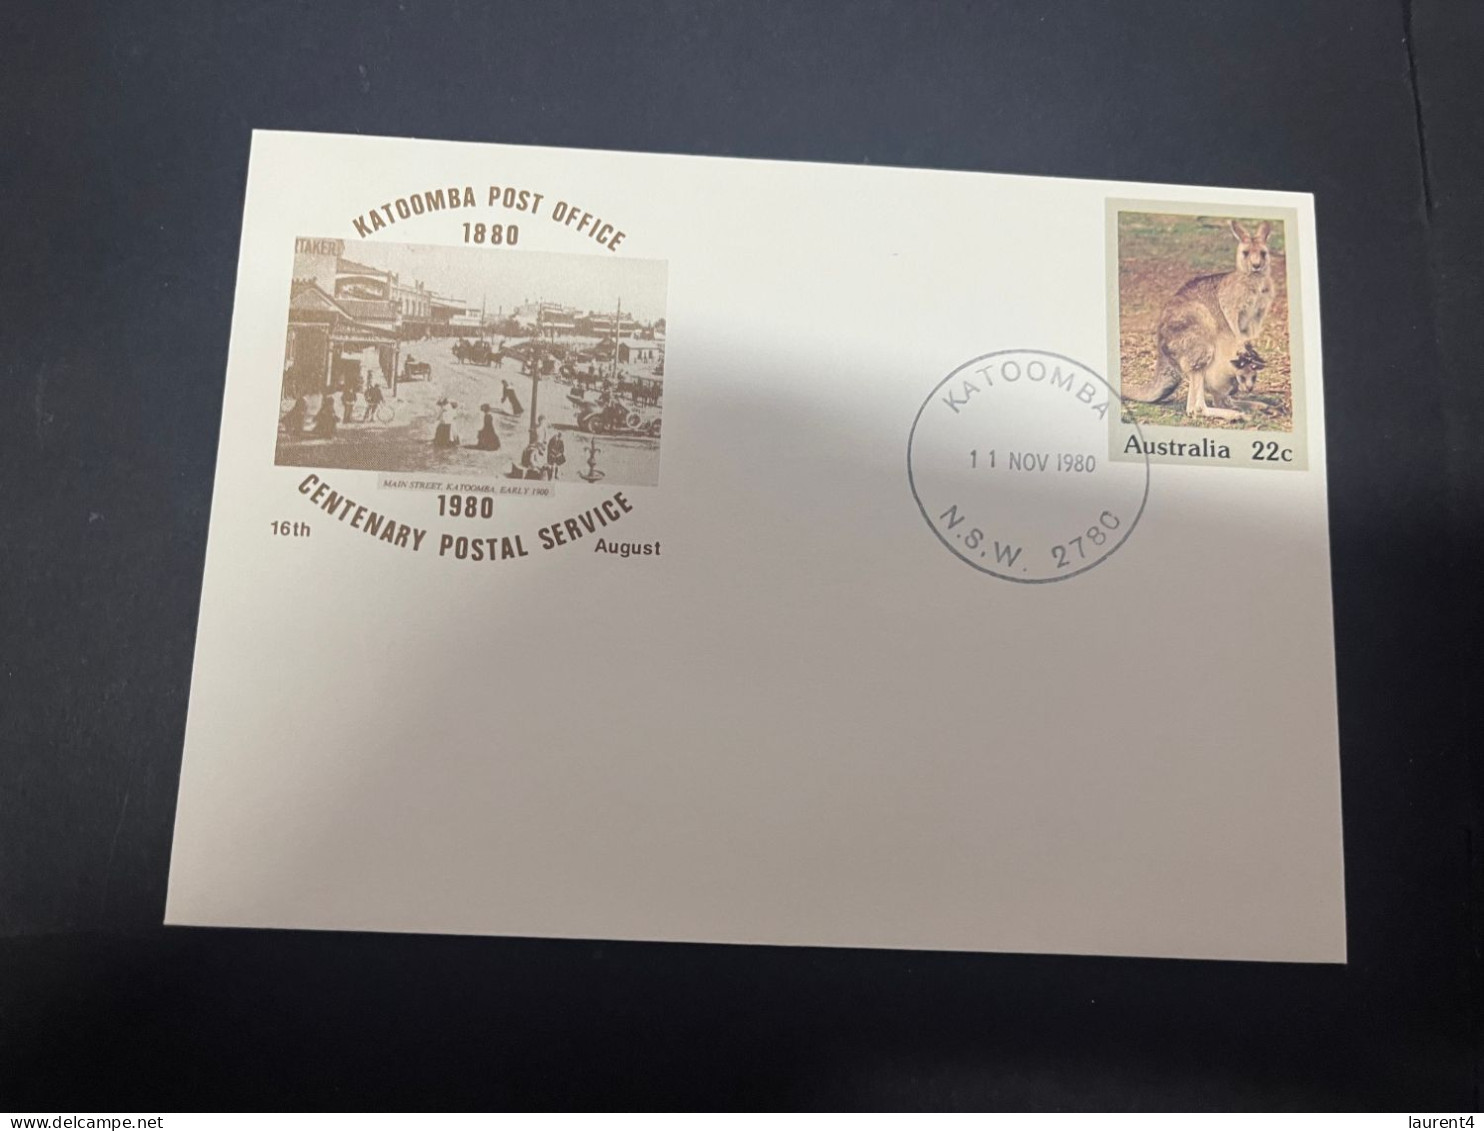 1-5-2024 (3 Z 39) Australia FDC (3 Covers) 1980 - Katoomba Post Office Centenary (NSW 2780) - Premiers Jours (FDC)